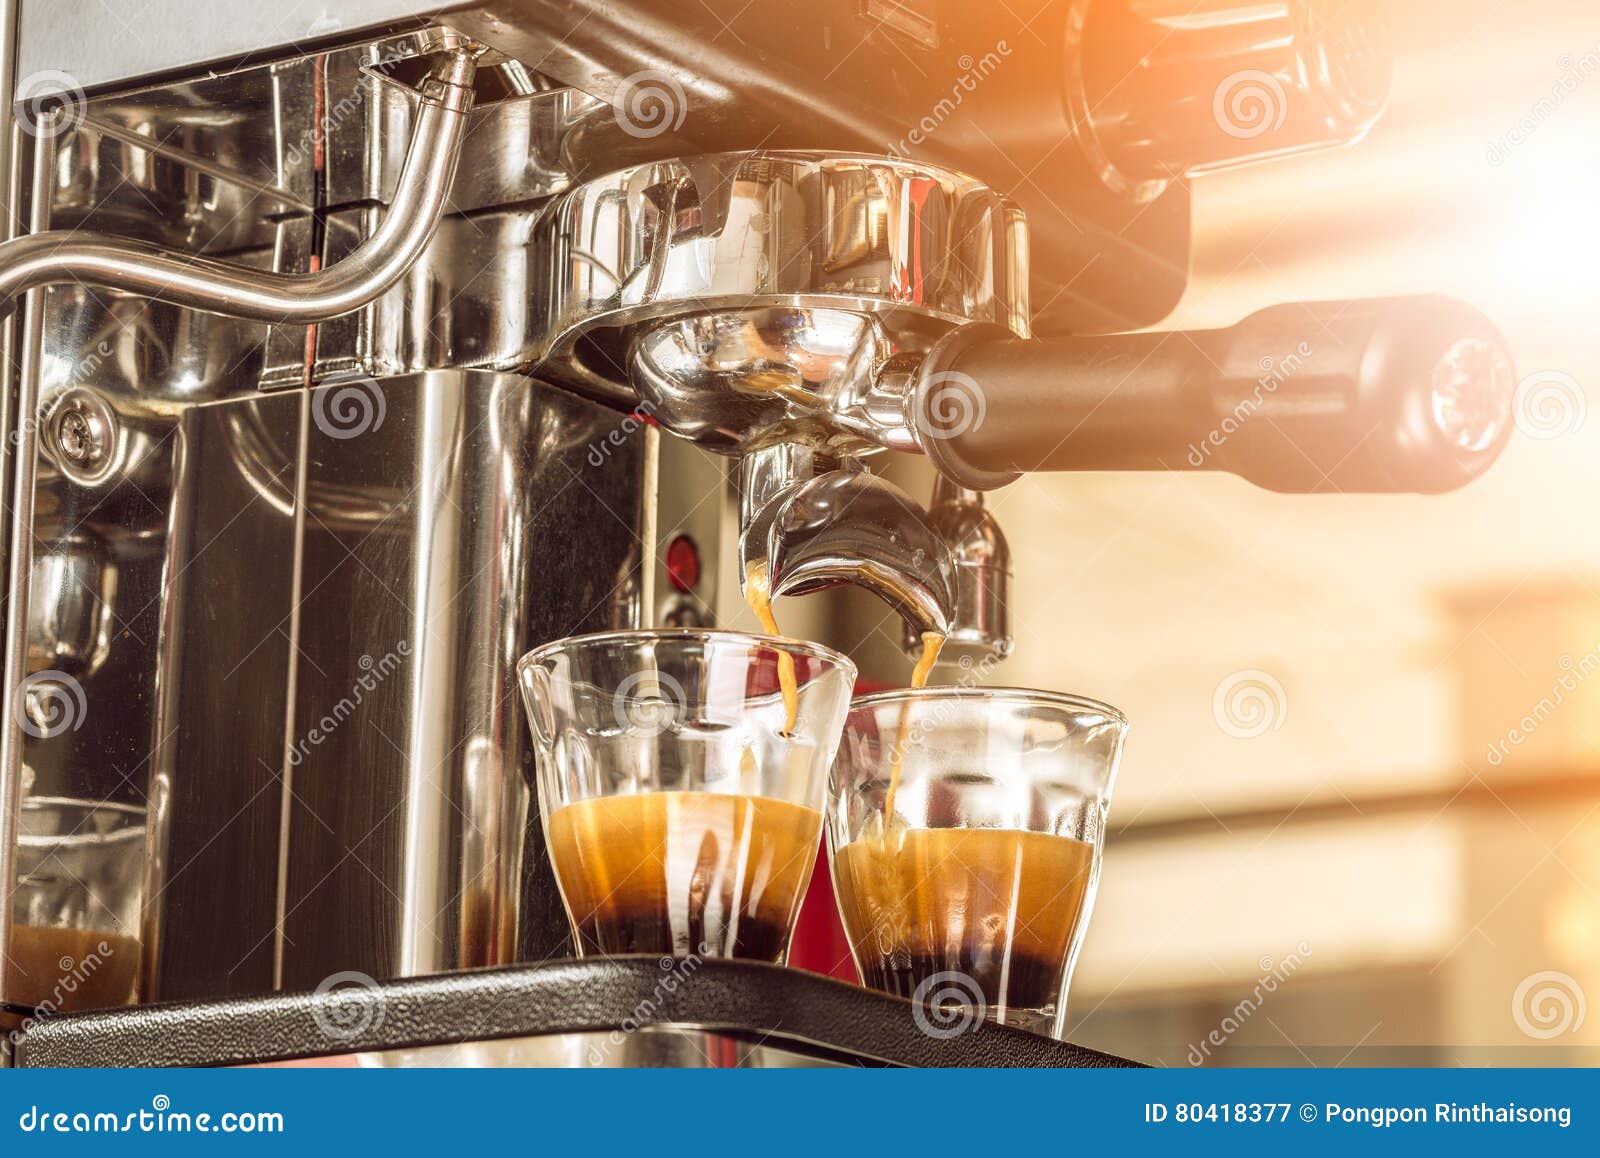 close-up of espresso pouring from coffee machine at the morning